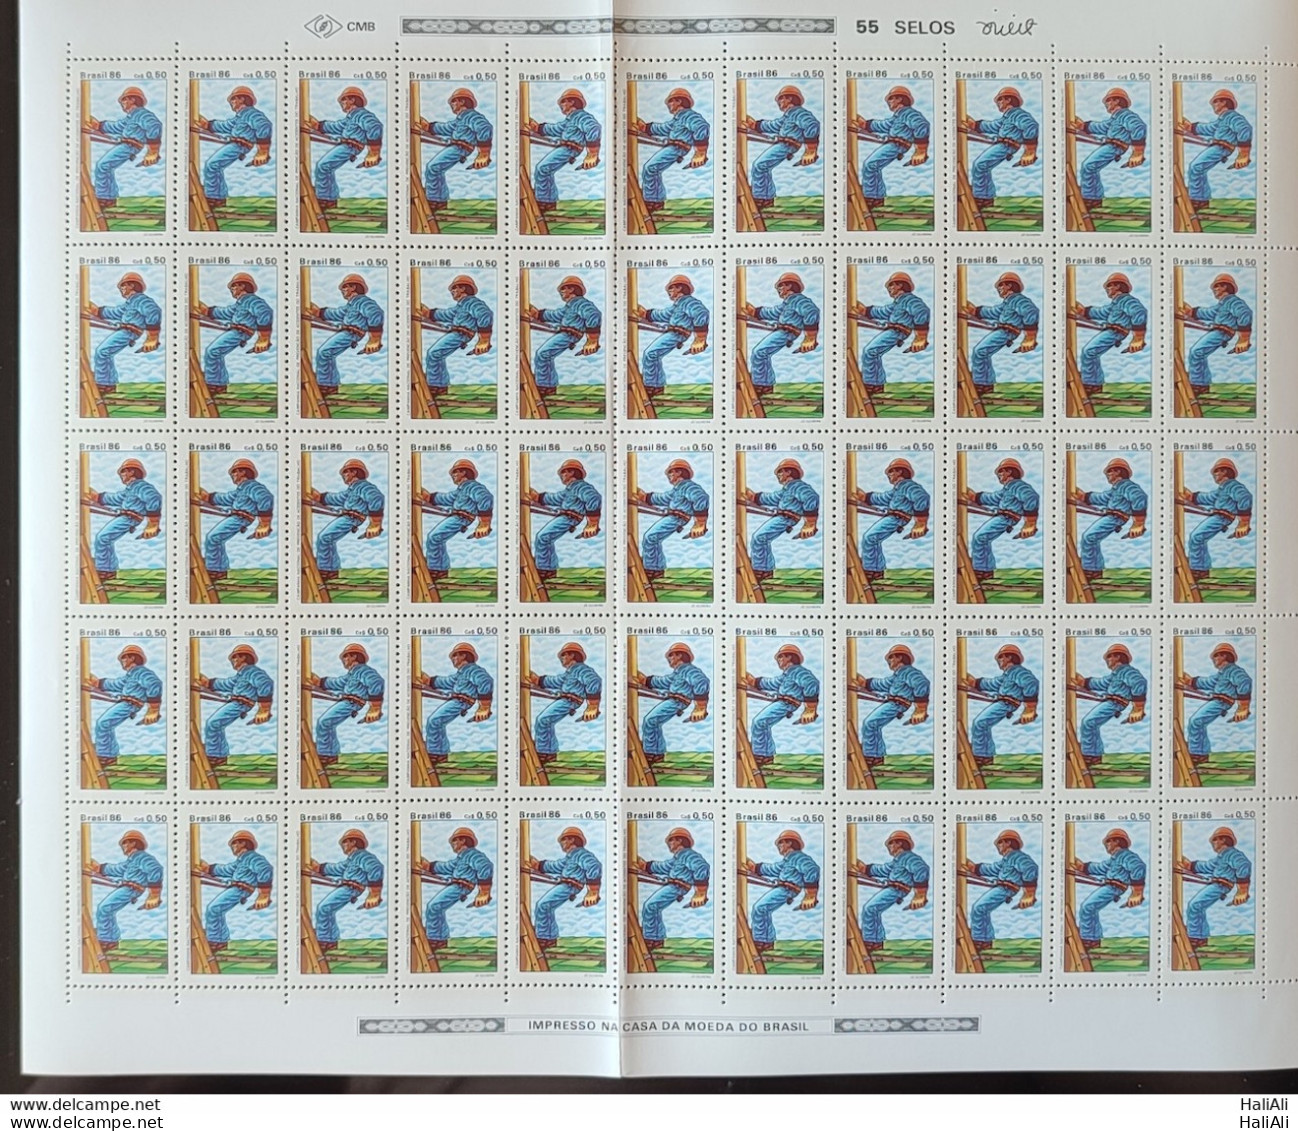 C 1516 Brazil Stamp Prevention Of Work Accidents Health Safety 1986 Sheet.jpg - Nuevos